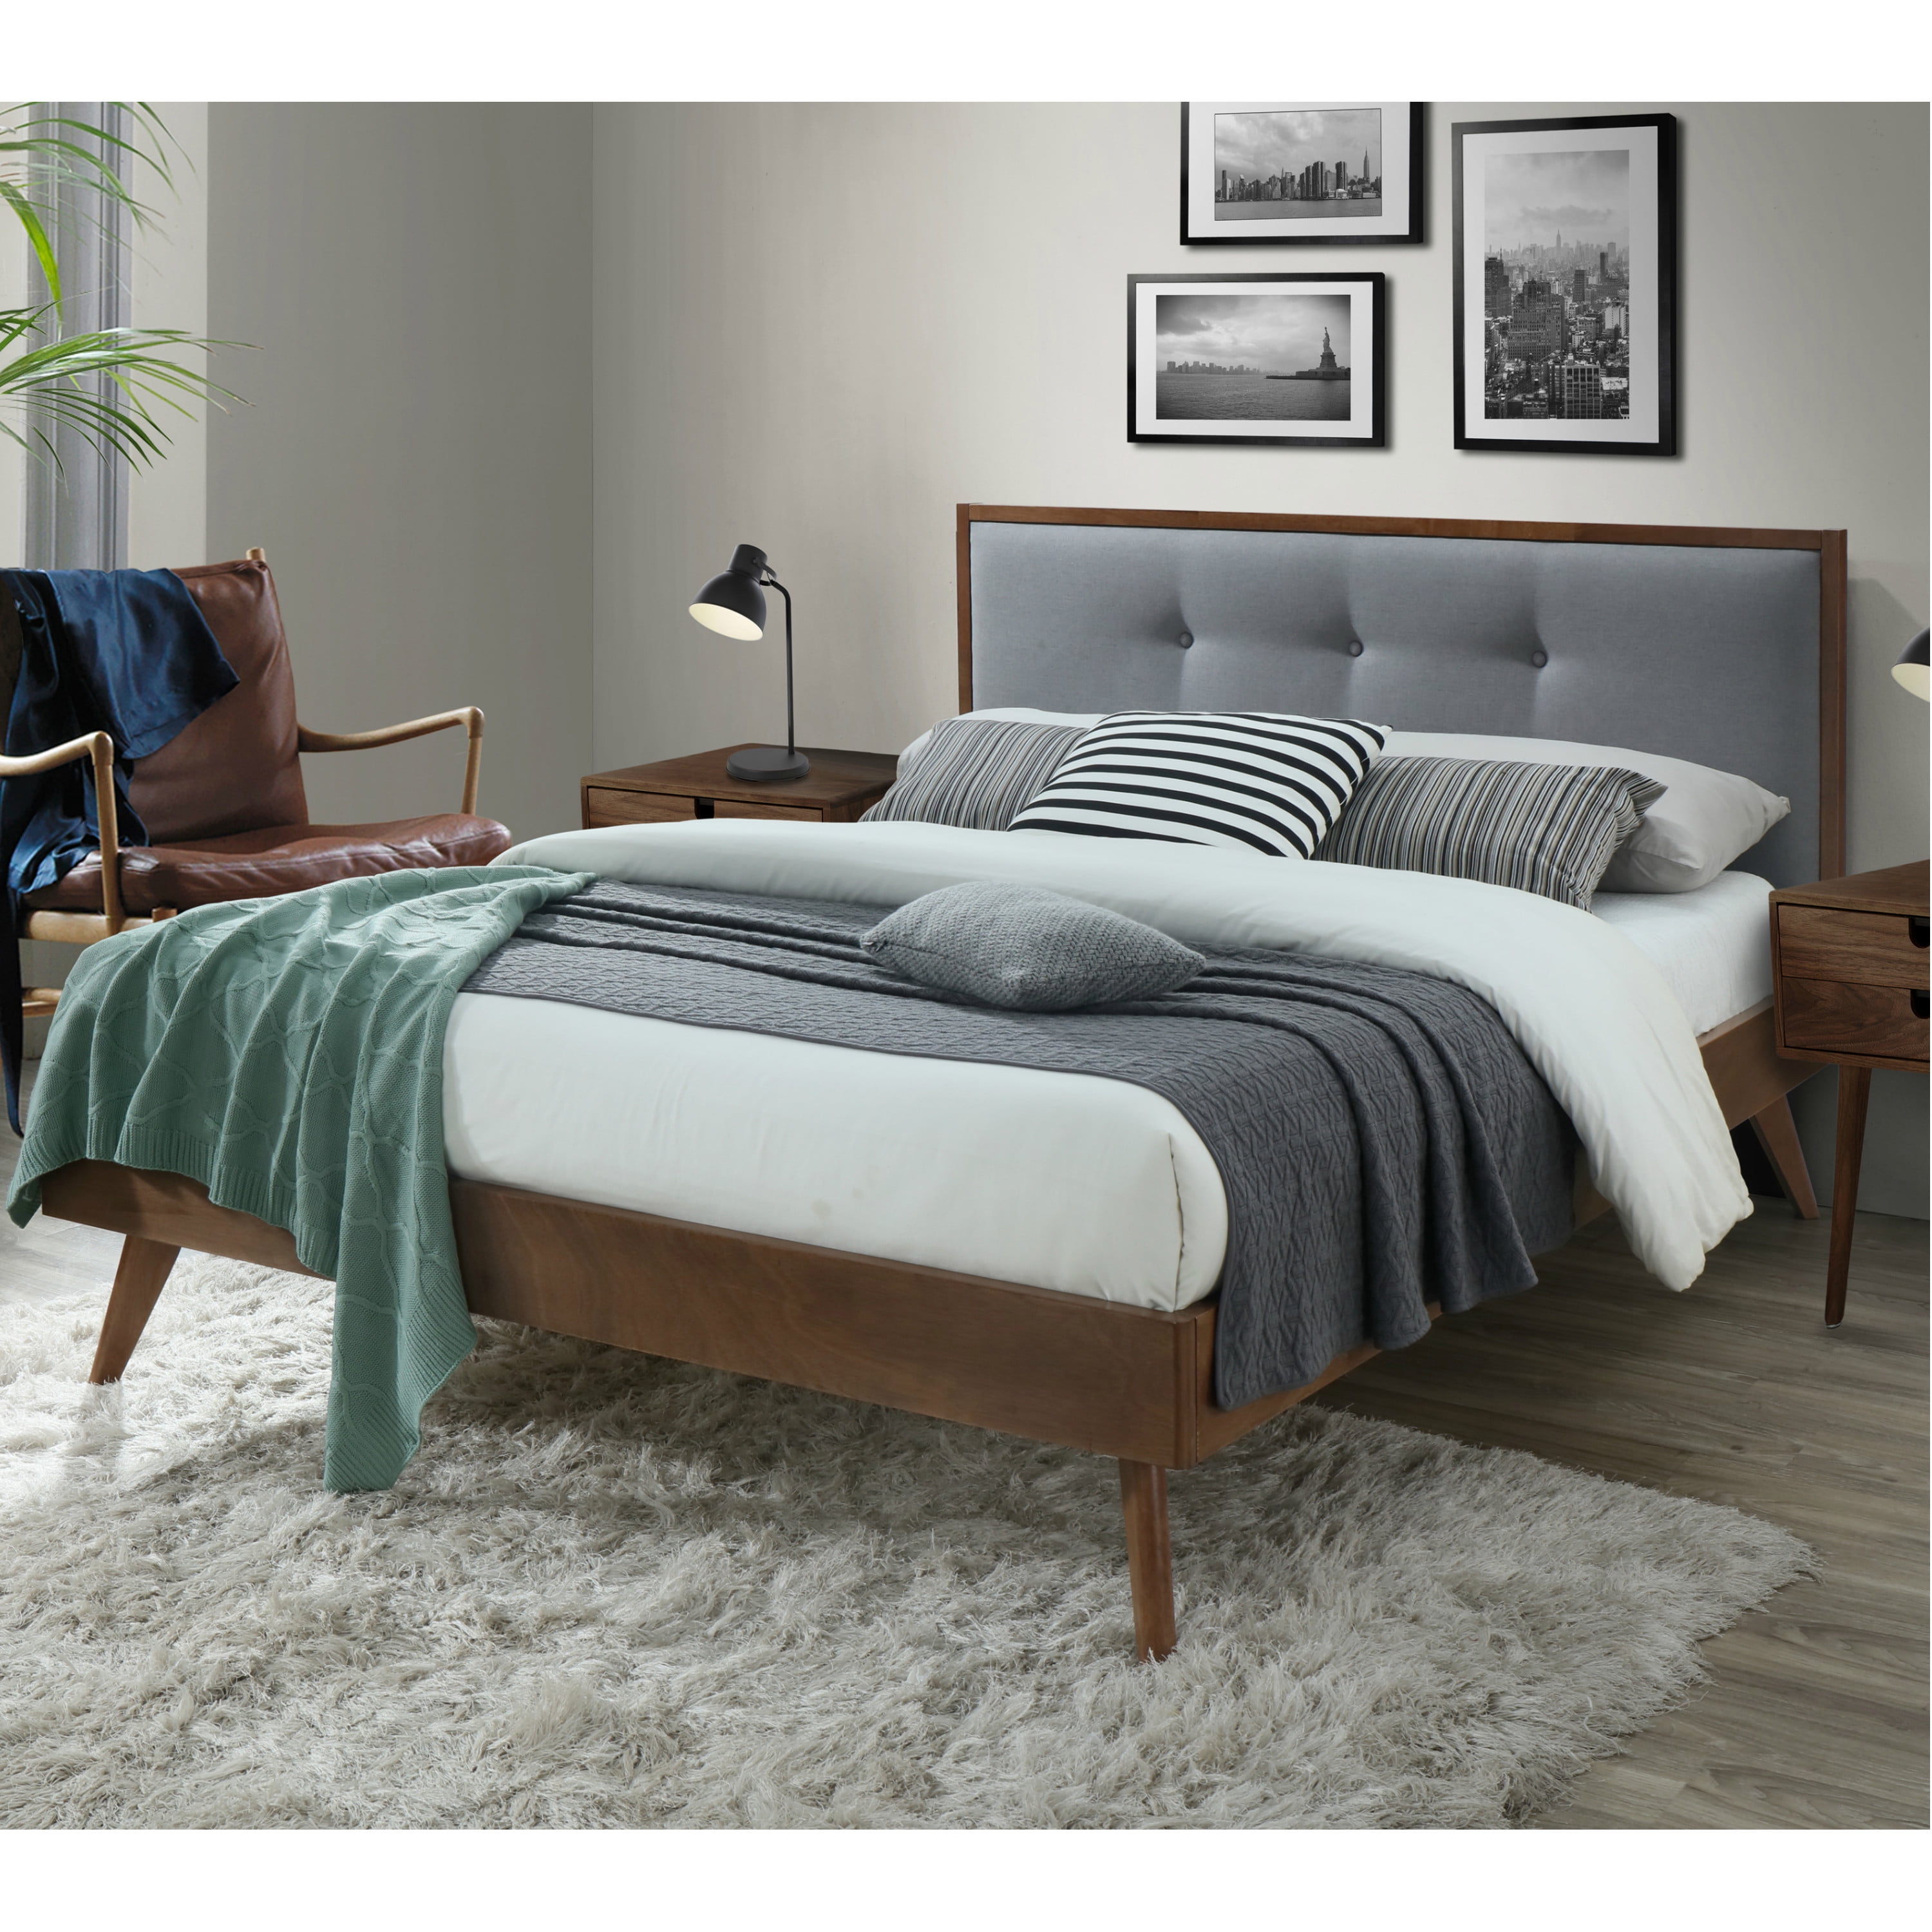 DG Casa Montana Mid Century Modern Platfrom Bed Frame with Tufted